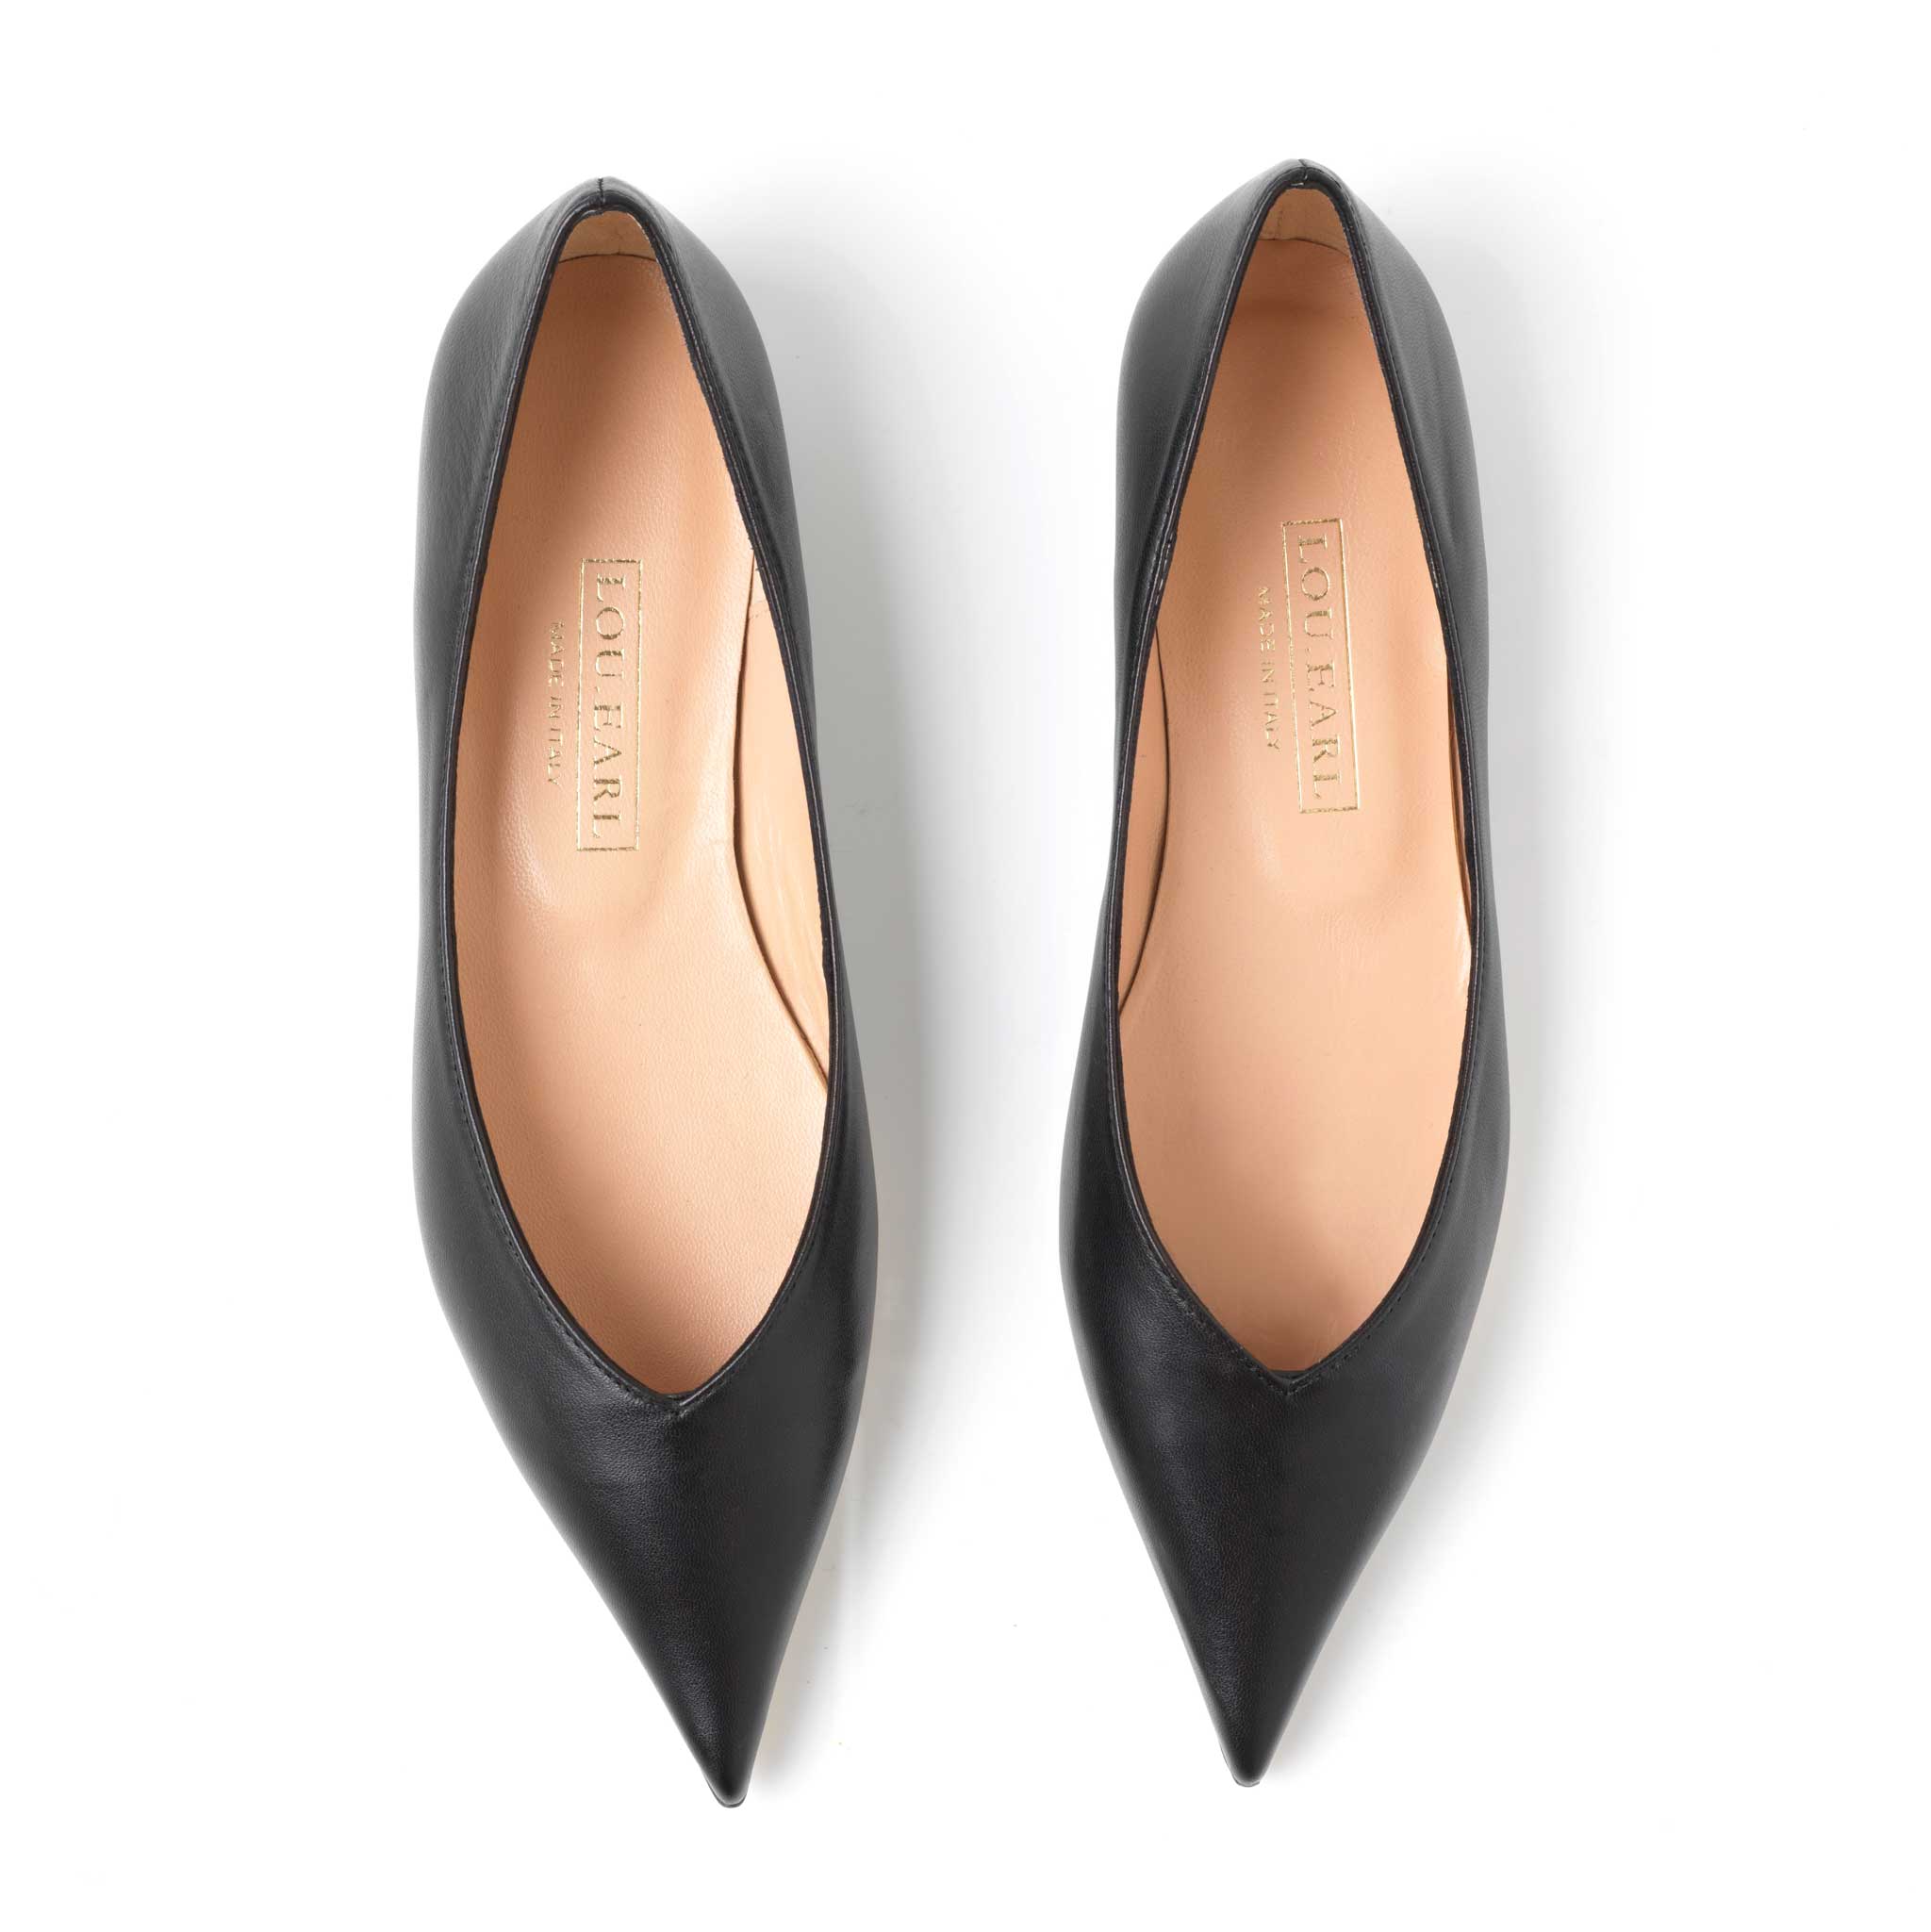 trending ultra pointy flat shoes for women in black Italian leather 